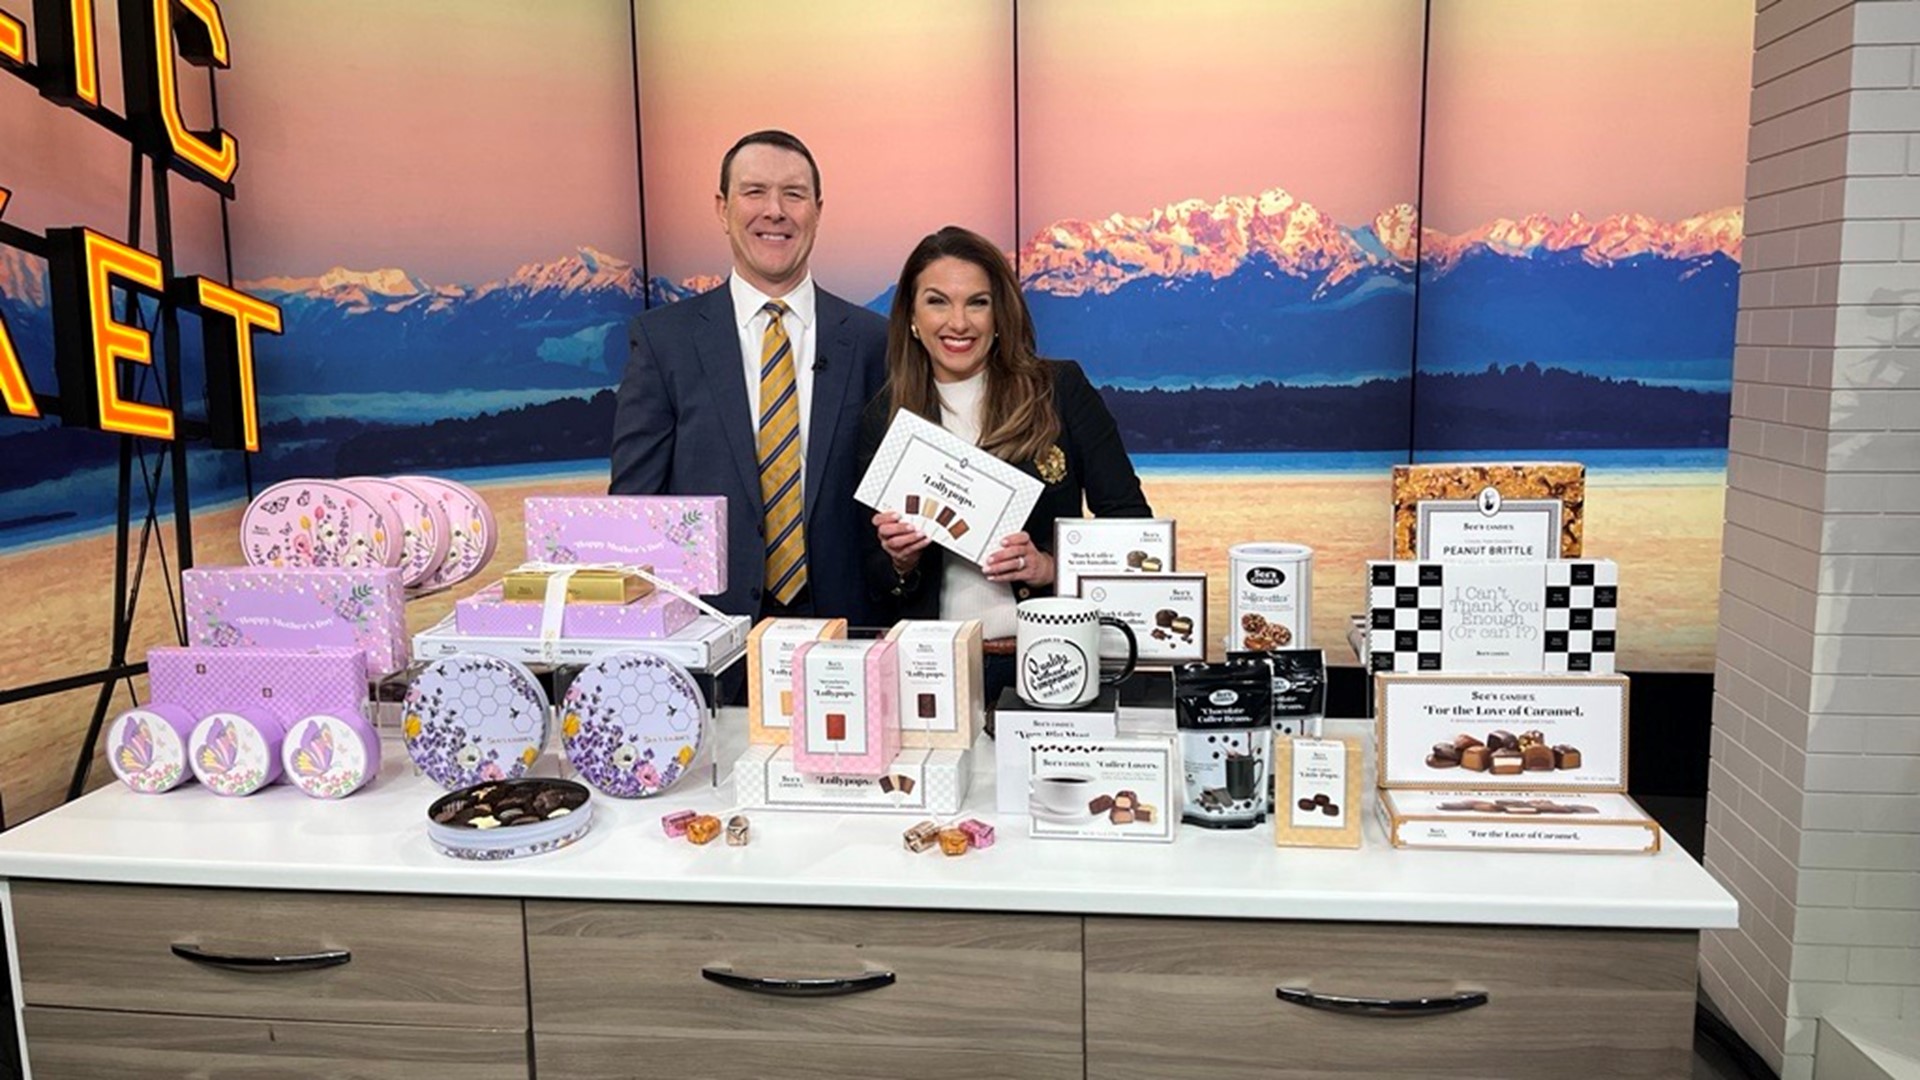 See's President and CEO Pat Egan chats with Amity about the nostalgic sweet treats. Their grand opening at University Place will be on April 20th. #newdaynw